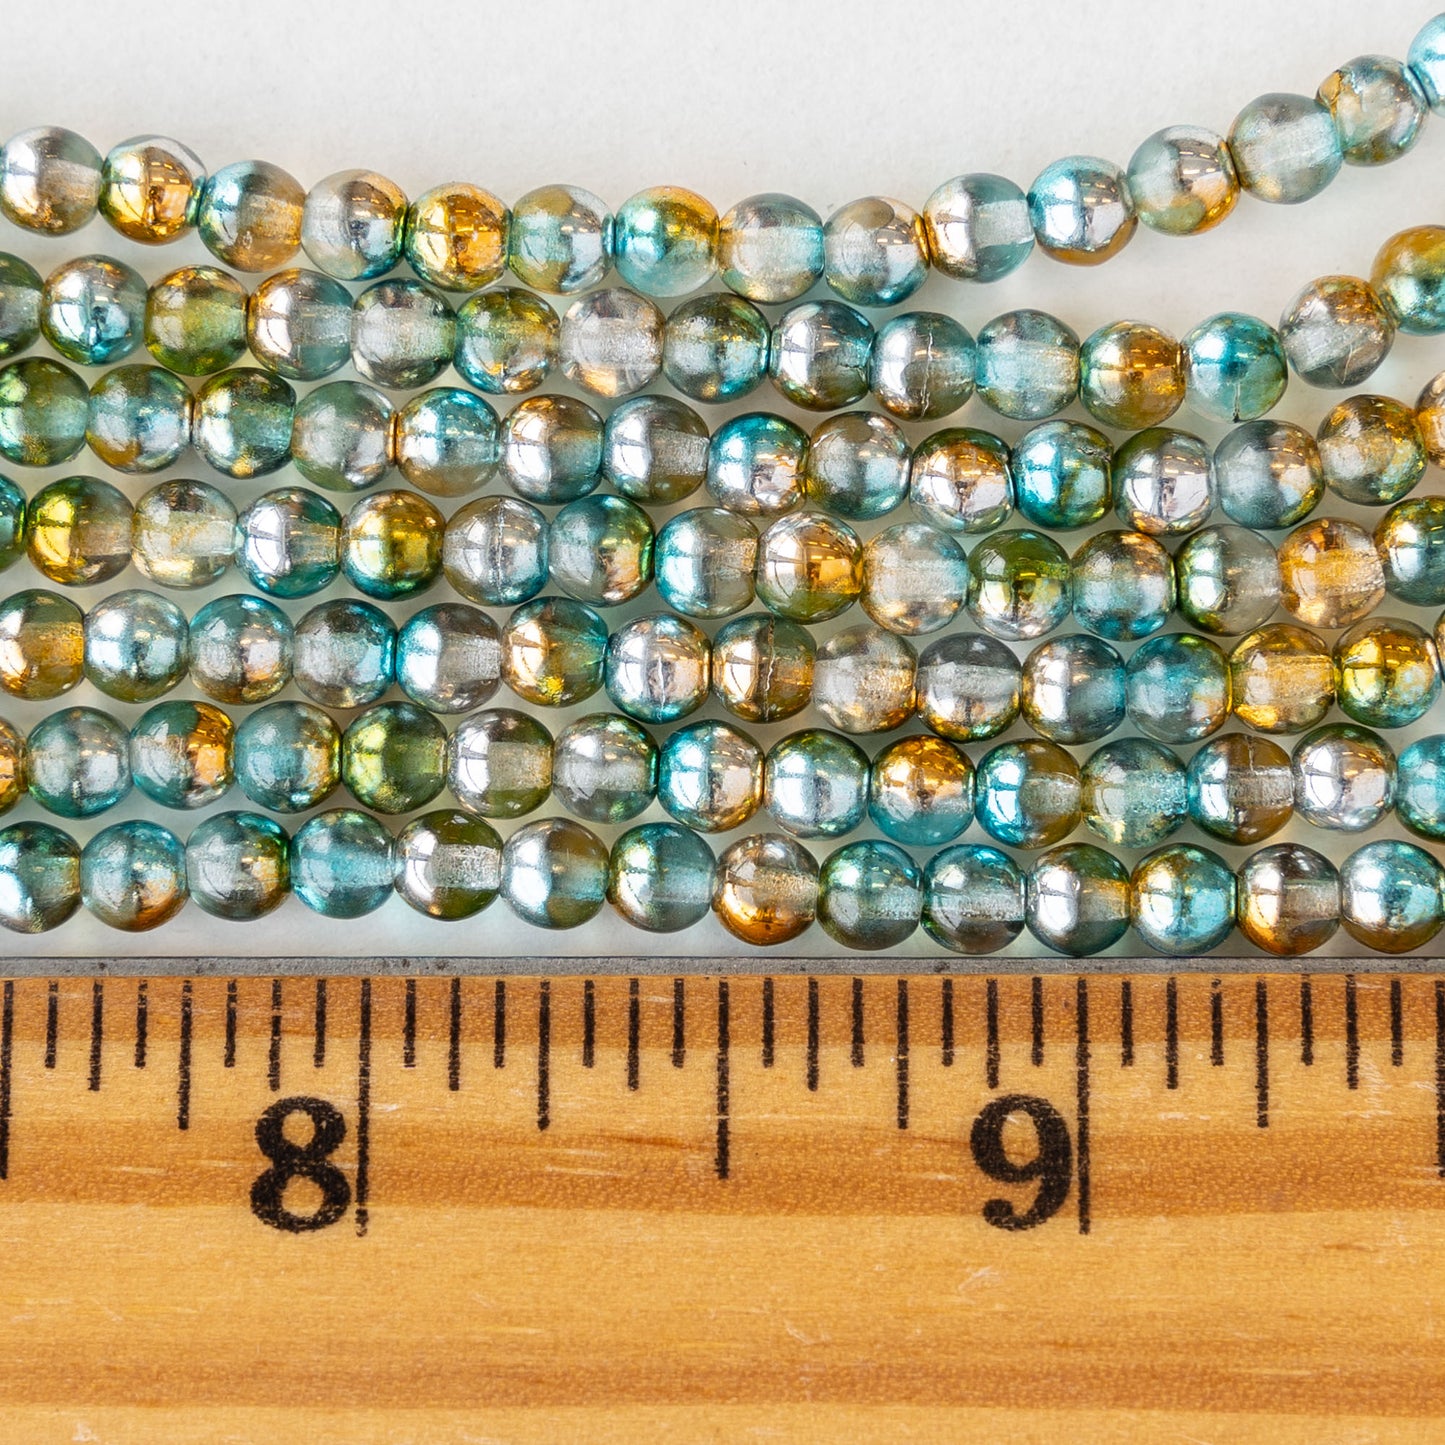 4mm Round Glass Beads - Amber, Teal and Silver Sparkle - 50 Beads